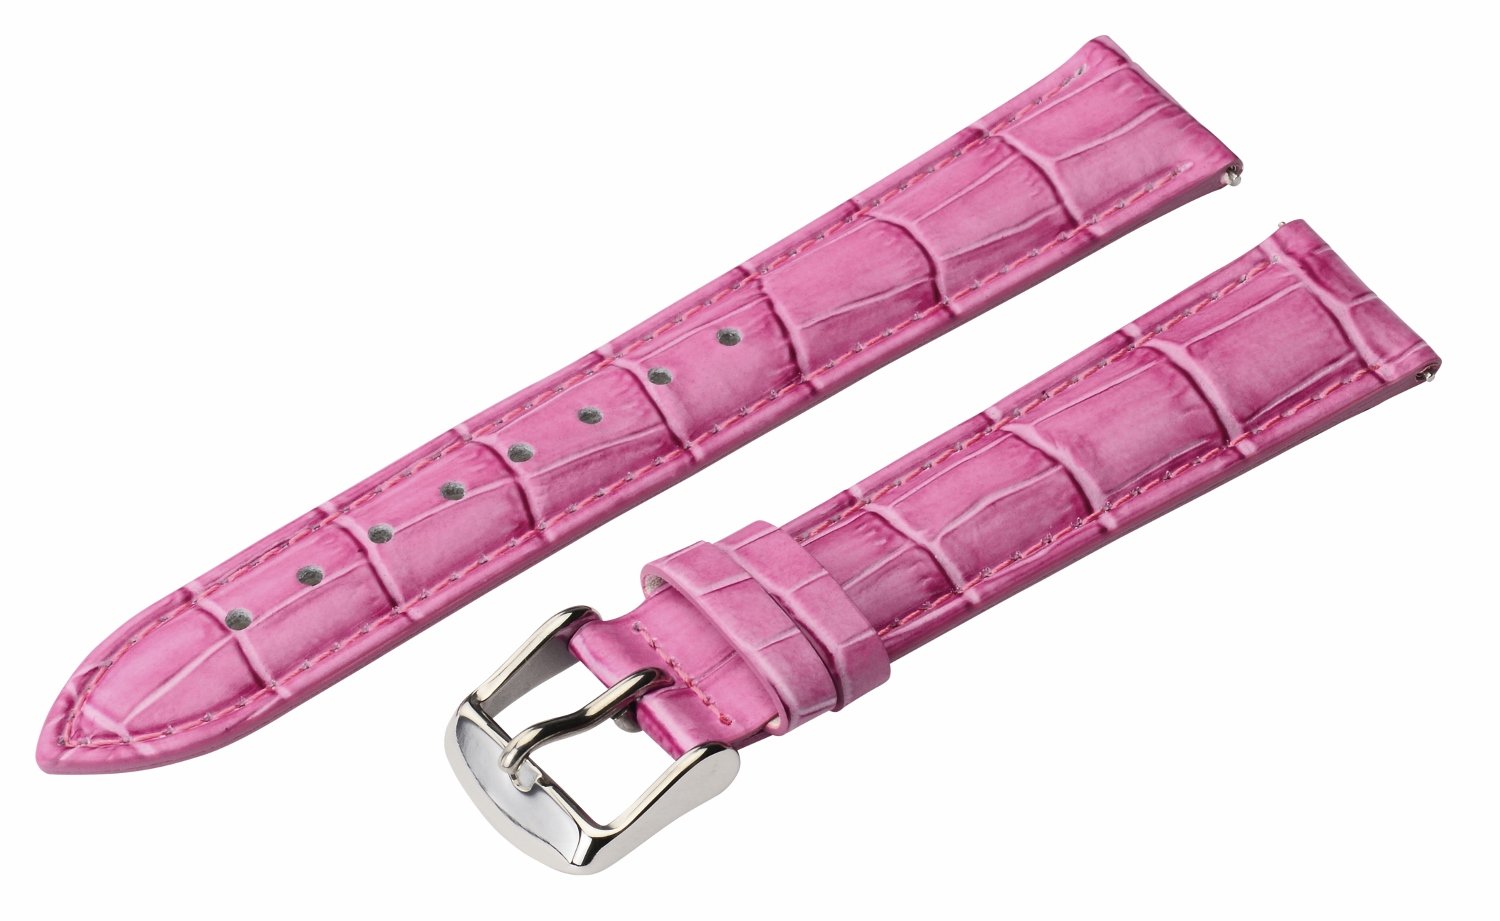 Clockwork Synergy - 2 Piece Ss Leather Classic Croco Grain Interchangeable Replacement Watch Band Strap 16mm - Solid Purple - Men Women